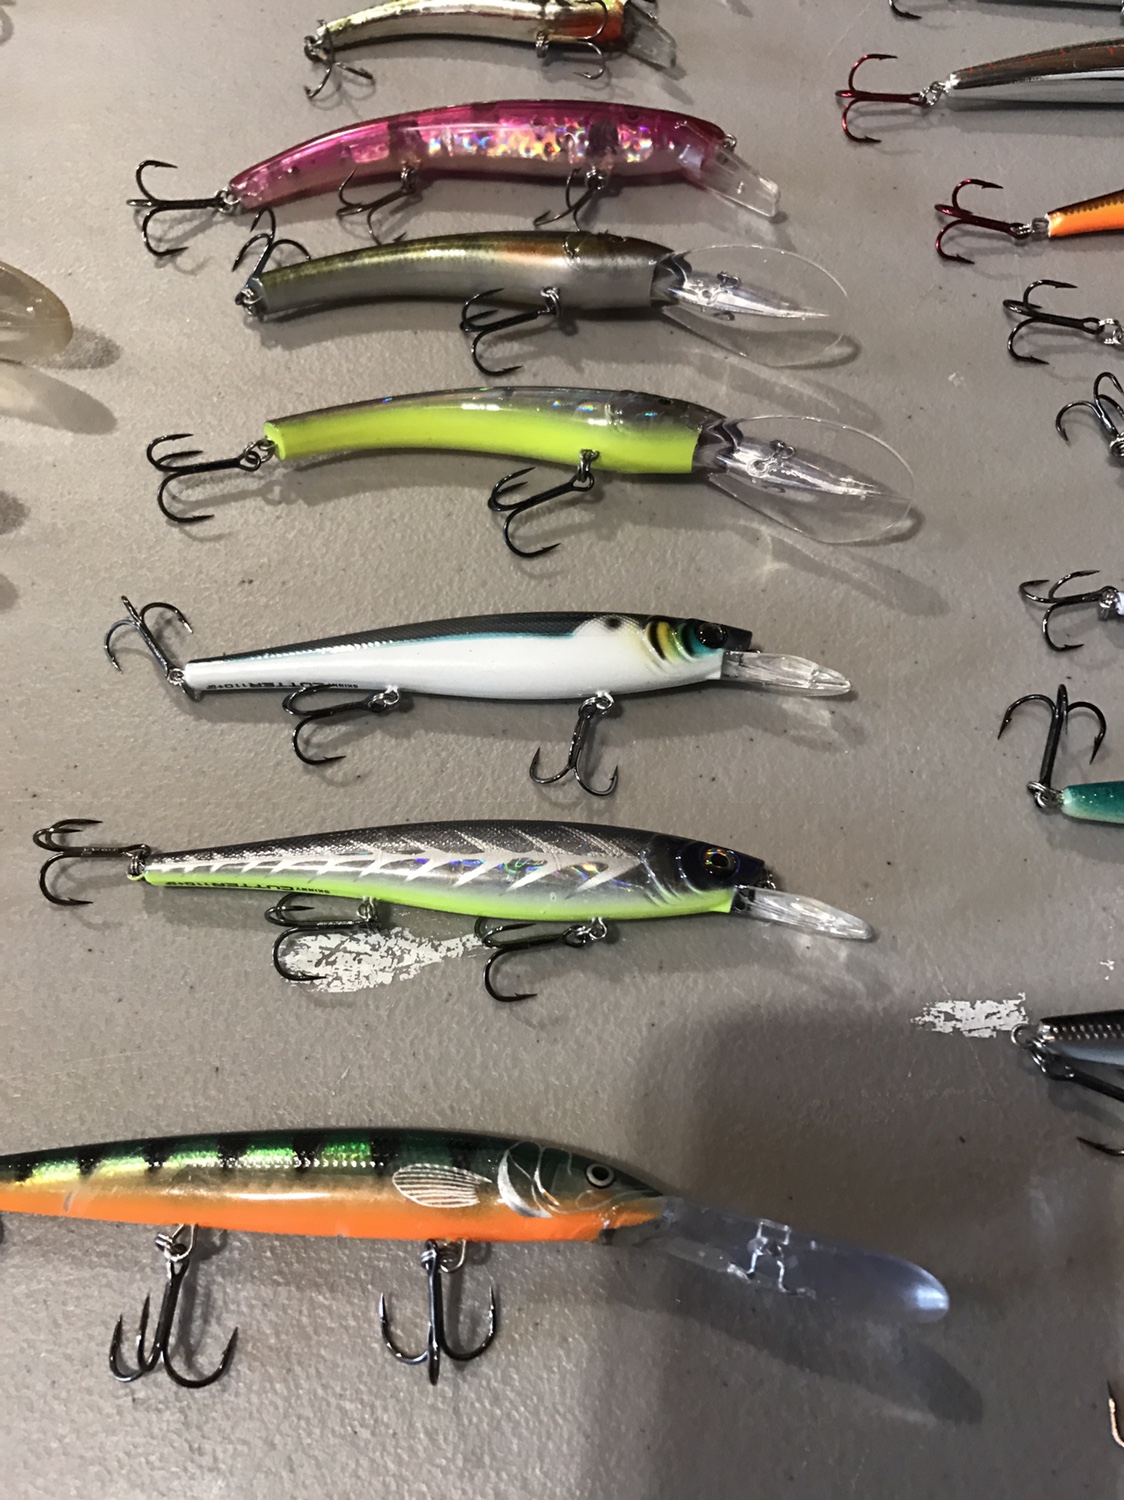 Walleye lure lot of 31 lures - Classifieds - Buy, Sell, Trade or Rent -  Lake Ontario United - Lake Ontario's Largest Fishing & Hunting Community -  New York and Ontario Canada